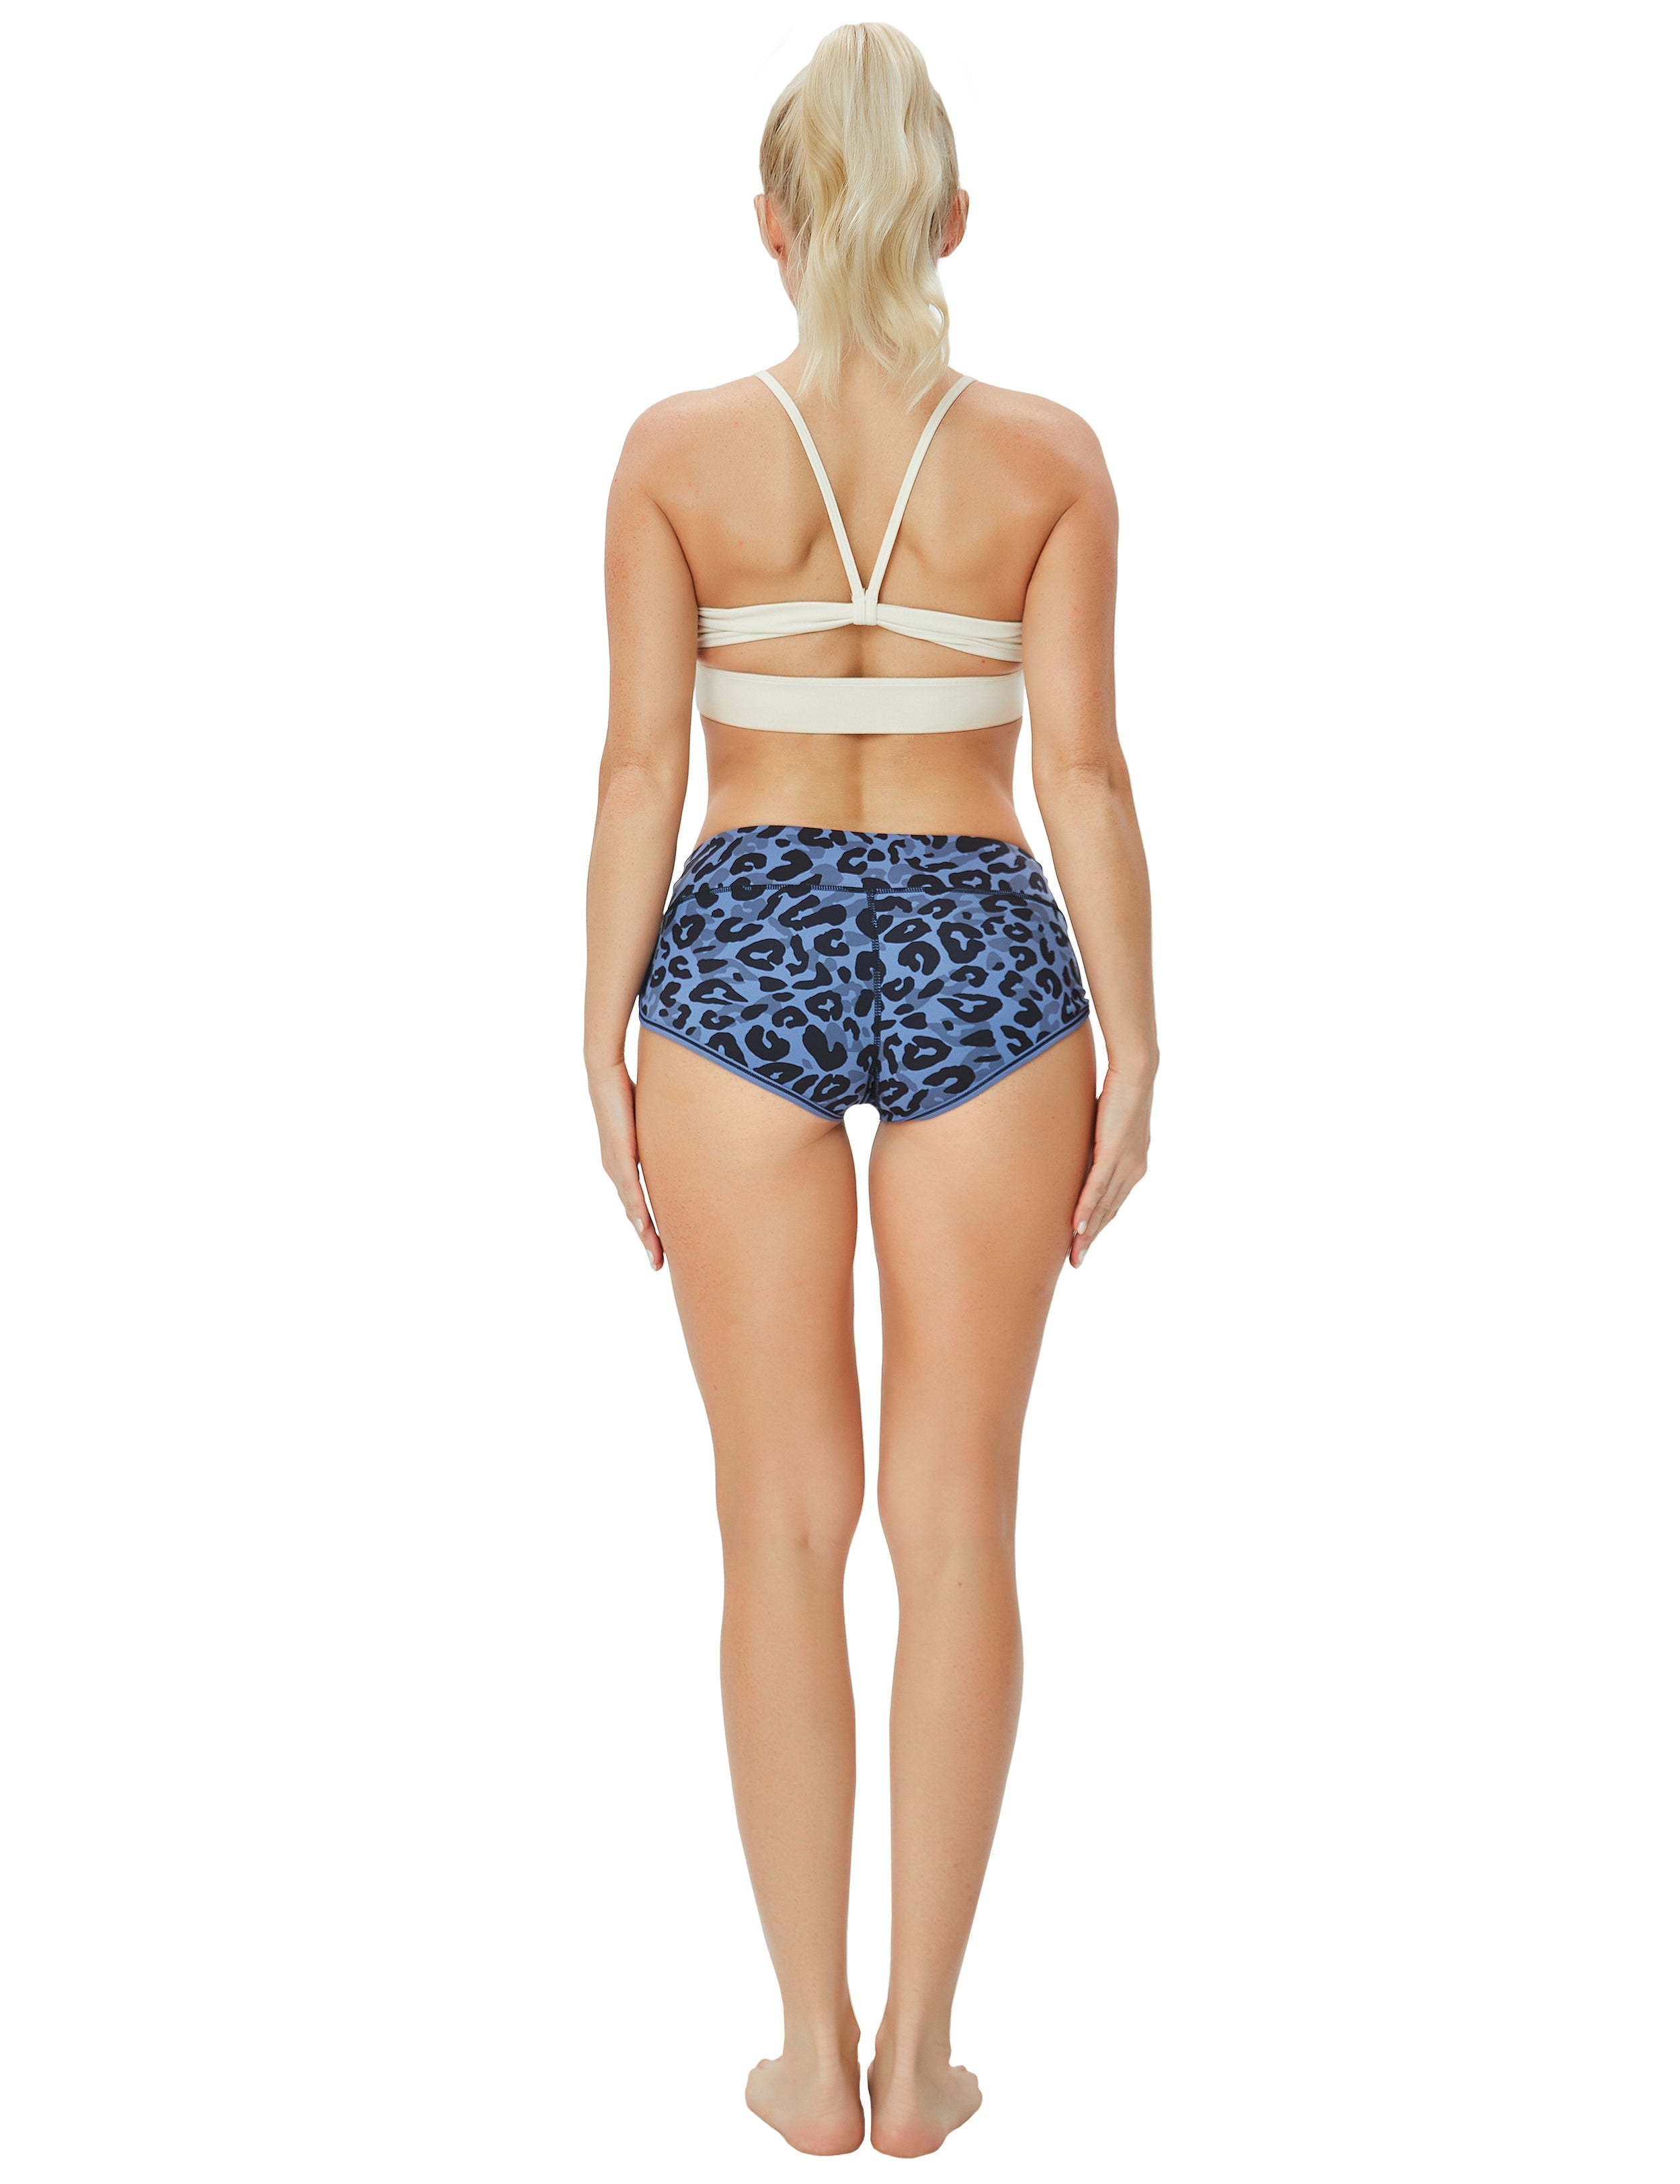 Printed Booty Tall Size Shorts navy_leopard Sleek, soft, smooth and totally comfortable: our newest sexy style is here. Softest-ever fabric High elasticity High density 4-way stretch Fabric doesn't attract lint easily No see-through Moisture-wicking Machine wash 78% Polyester, 22% Spandex